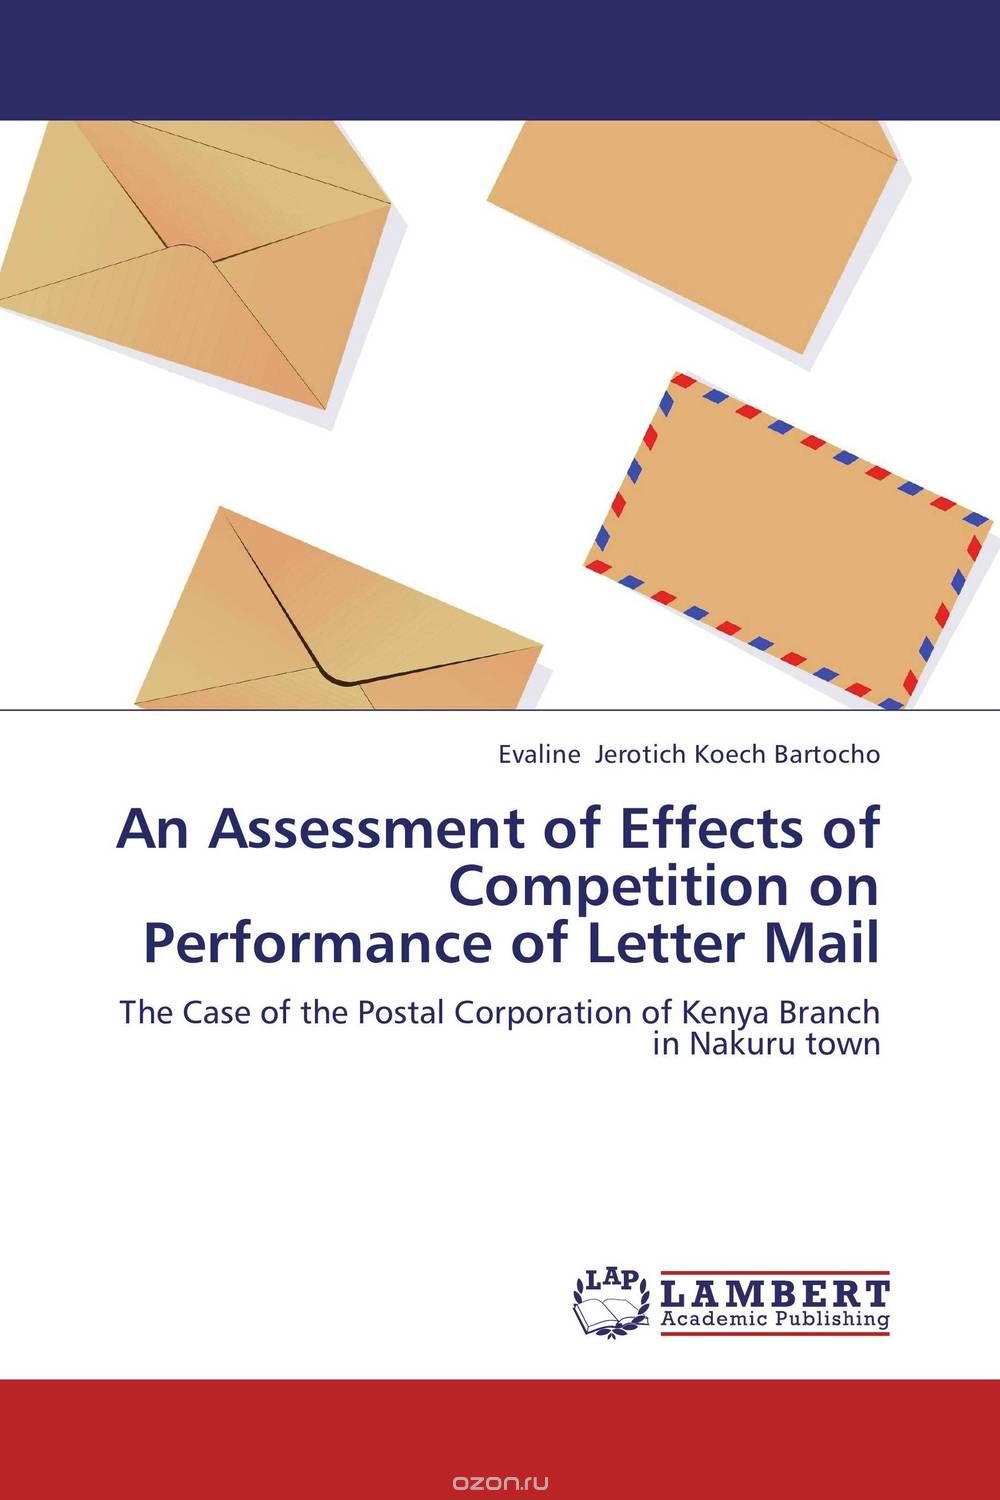 Скачать книгу "An Assessment of Effects of Competition on Performance of Letter Mail"